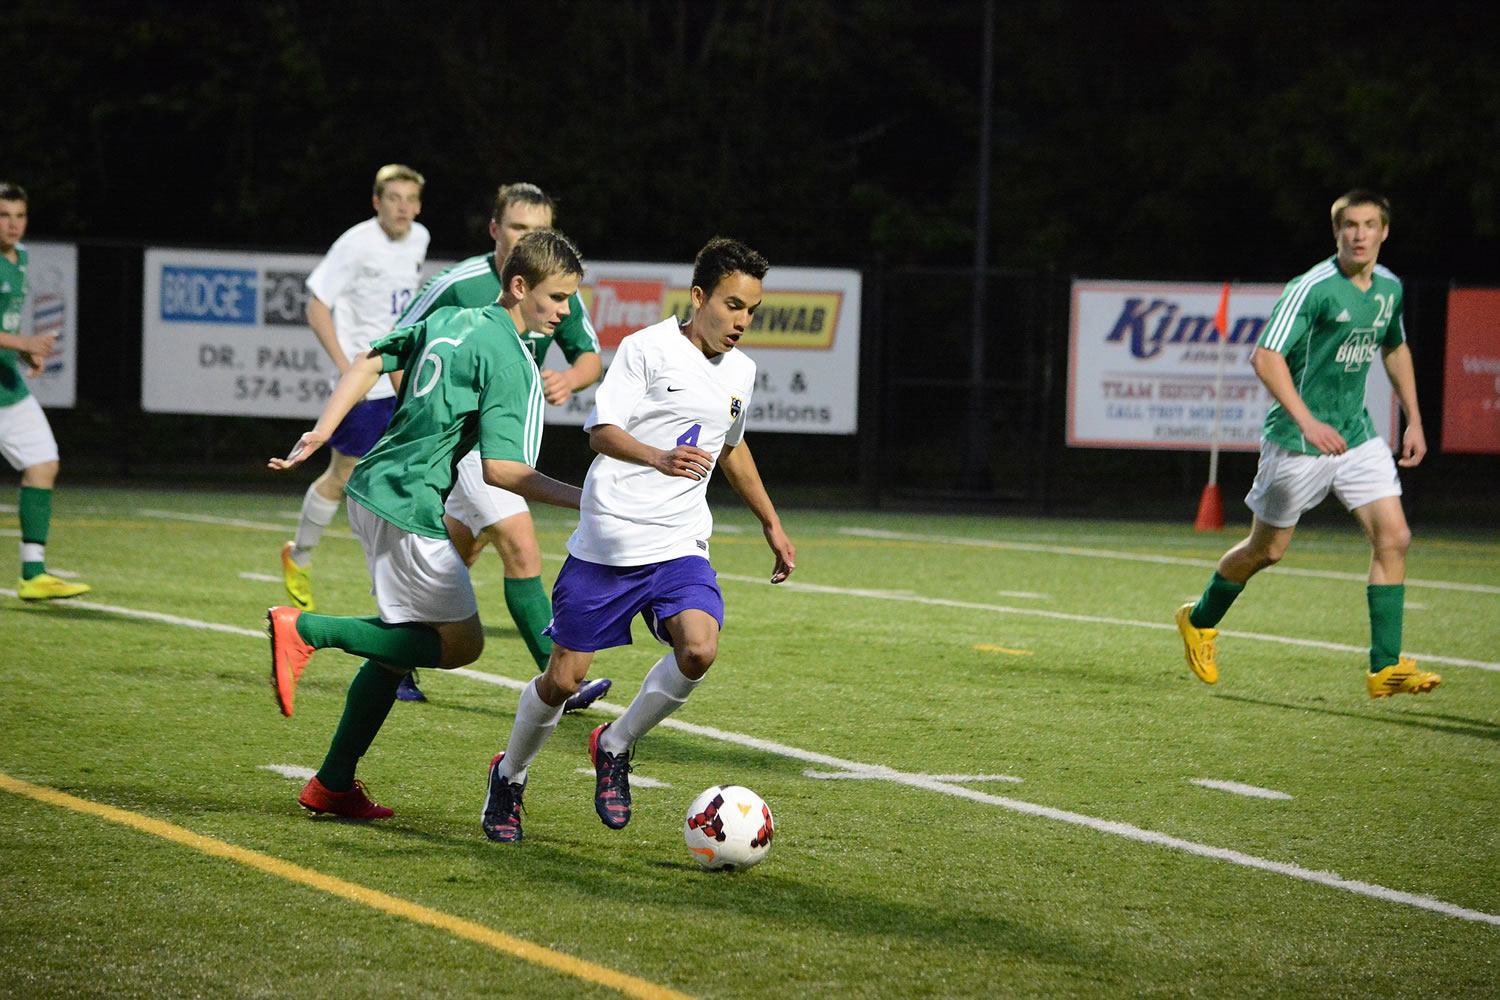 Columbia River's Rafiq DeJesus Iglesias dribbles the ball against Tumwater in a nonleague soccer match Thursday at Kiggins Bowl.